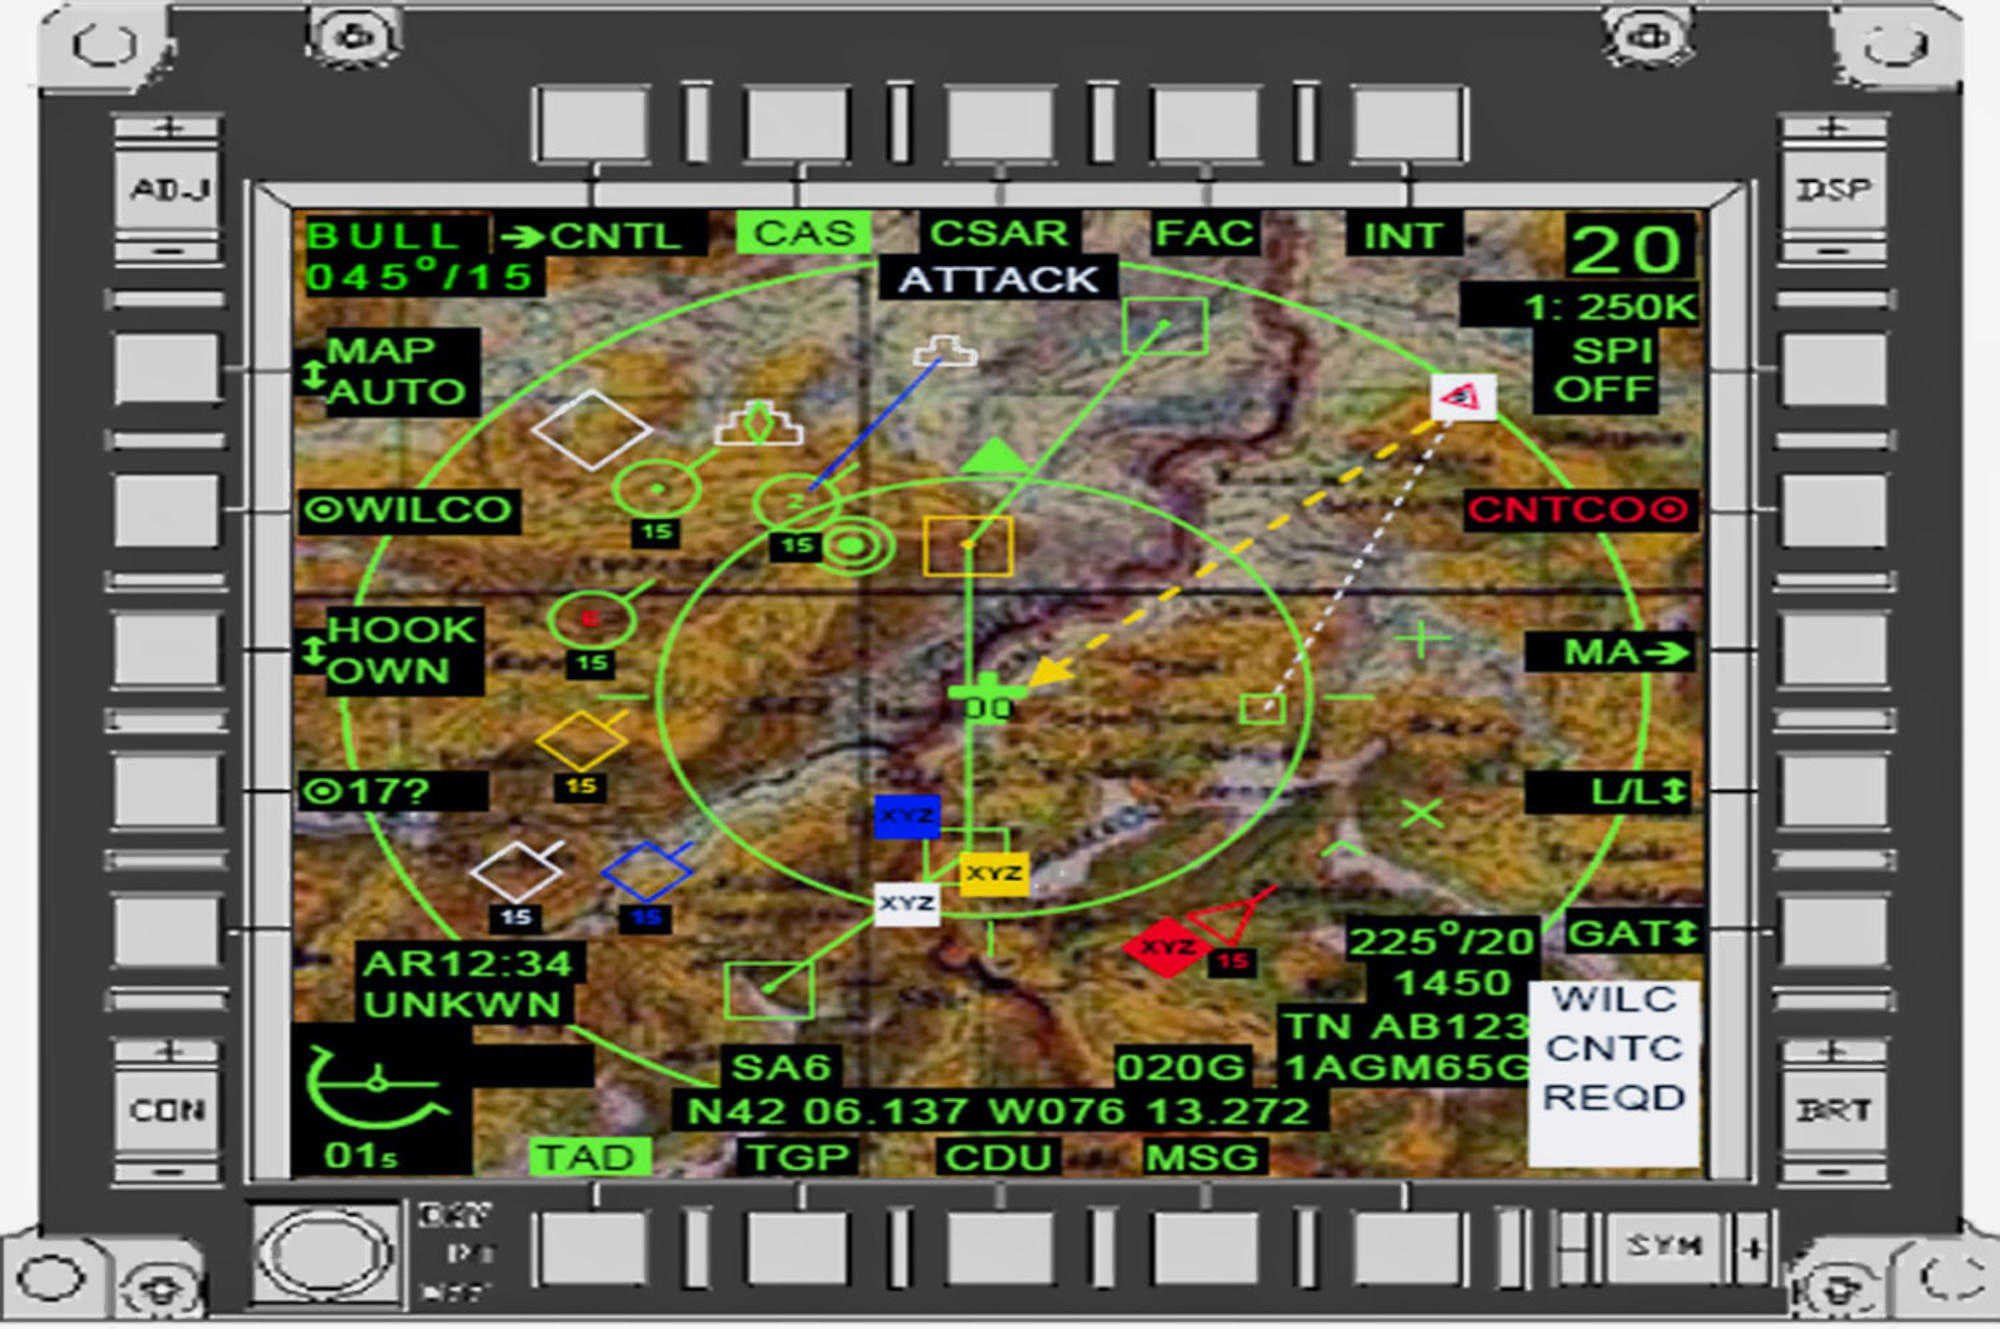 Pictured is a representation of what the dat link looks like to A-10 Thunderbolt II pilots. The most significant change to the newly modified A-10C is the addition of the Situational Awareness Data Link. With SADL, the A-10C joins a massive "Internet-like" network of land, air, and sea systems. (Courtesy graphic)